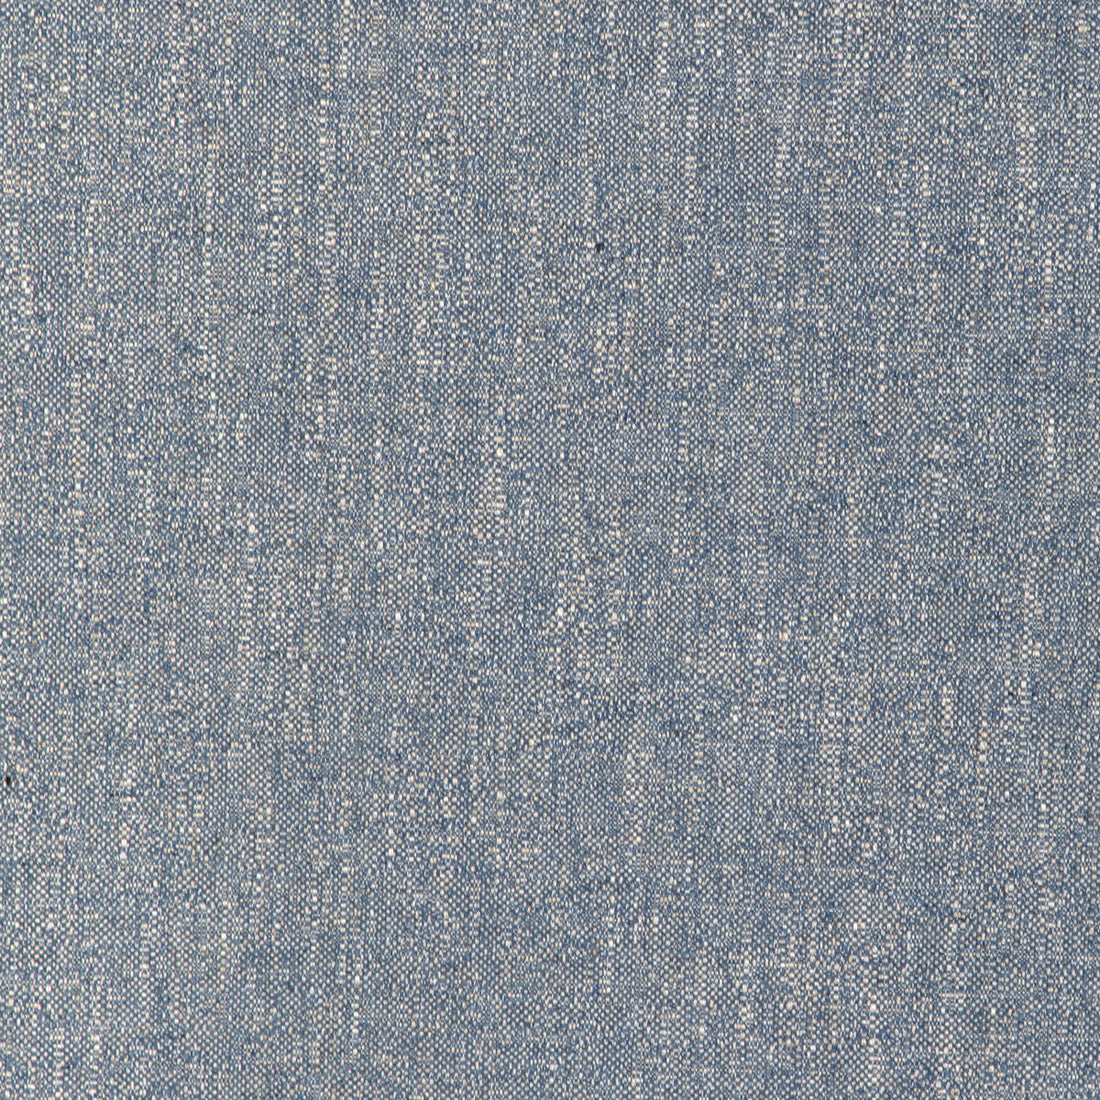 Kravet Design fabric in 36968-1516 color - pattern 36968.1516.0 - by Kravet Design in the Sustainable Textures II collection